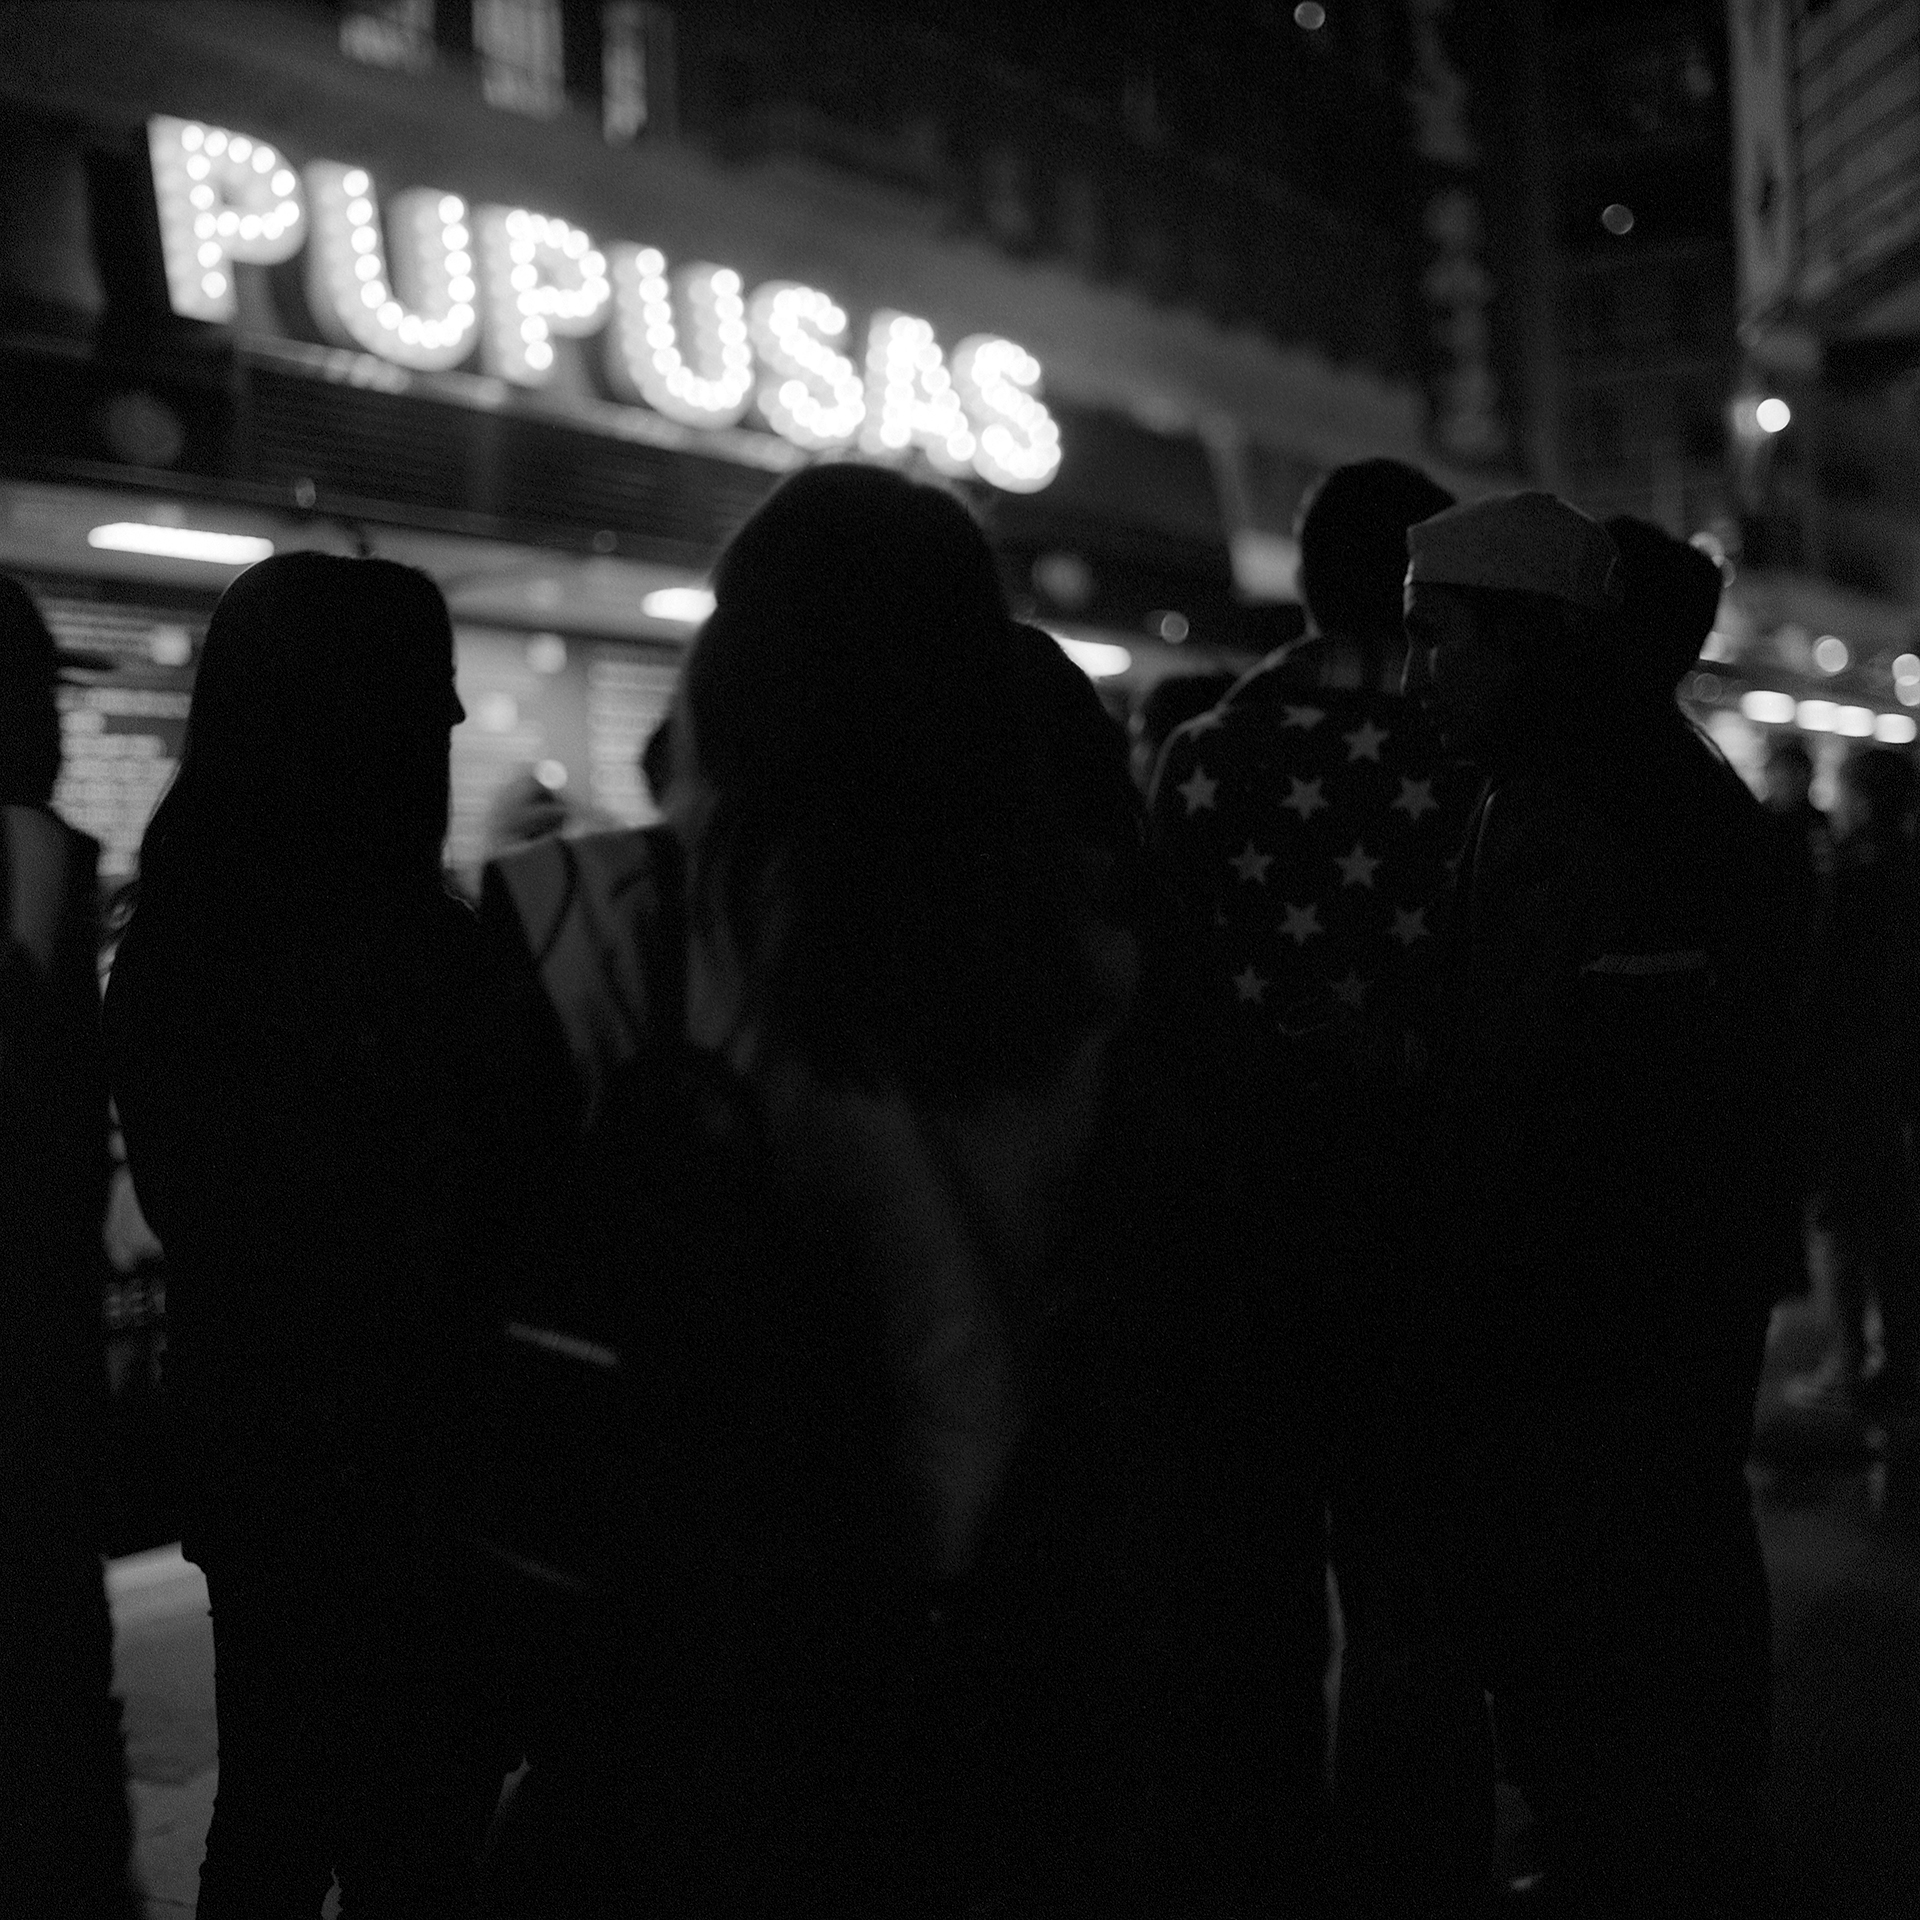 Silhouettes of people gathering to get pupusas from a food truck